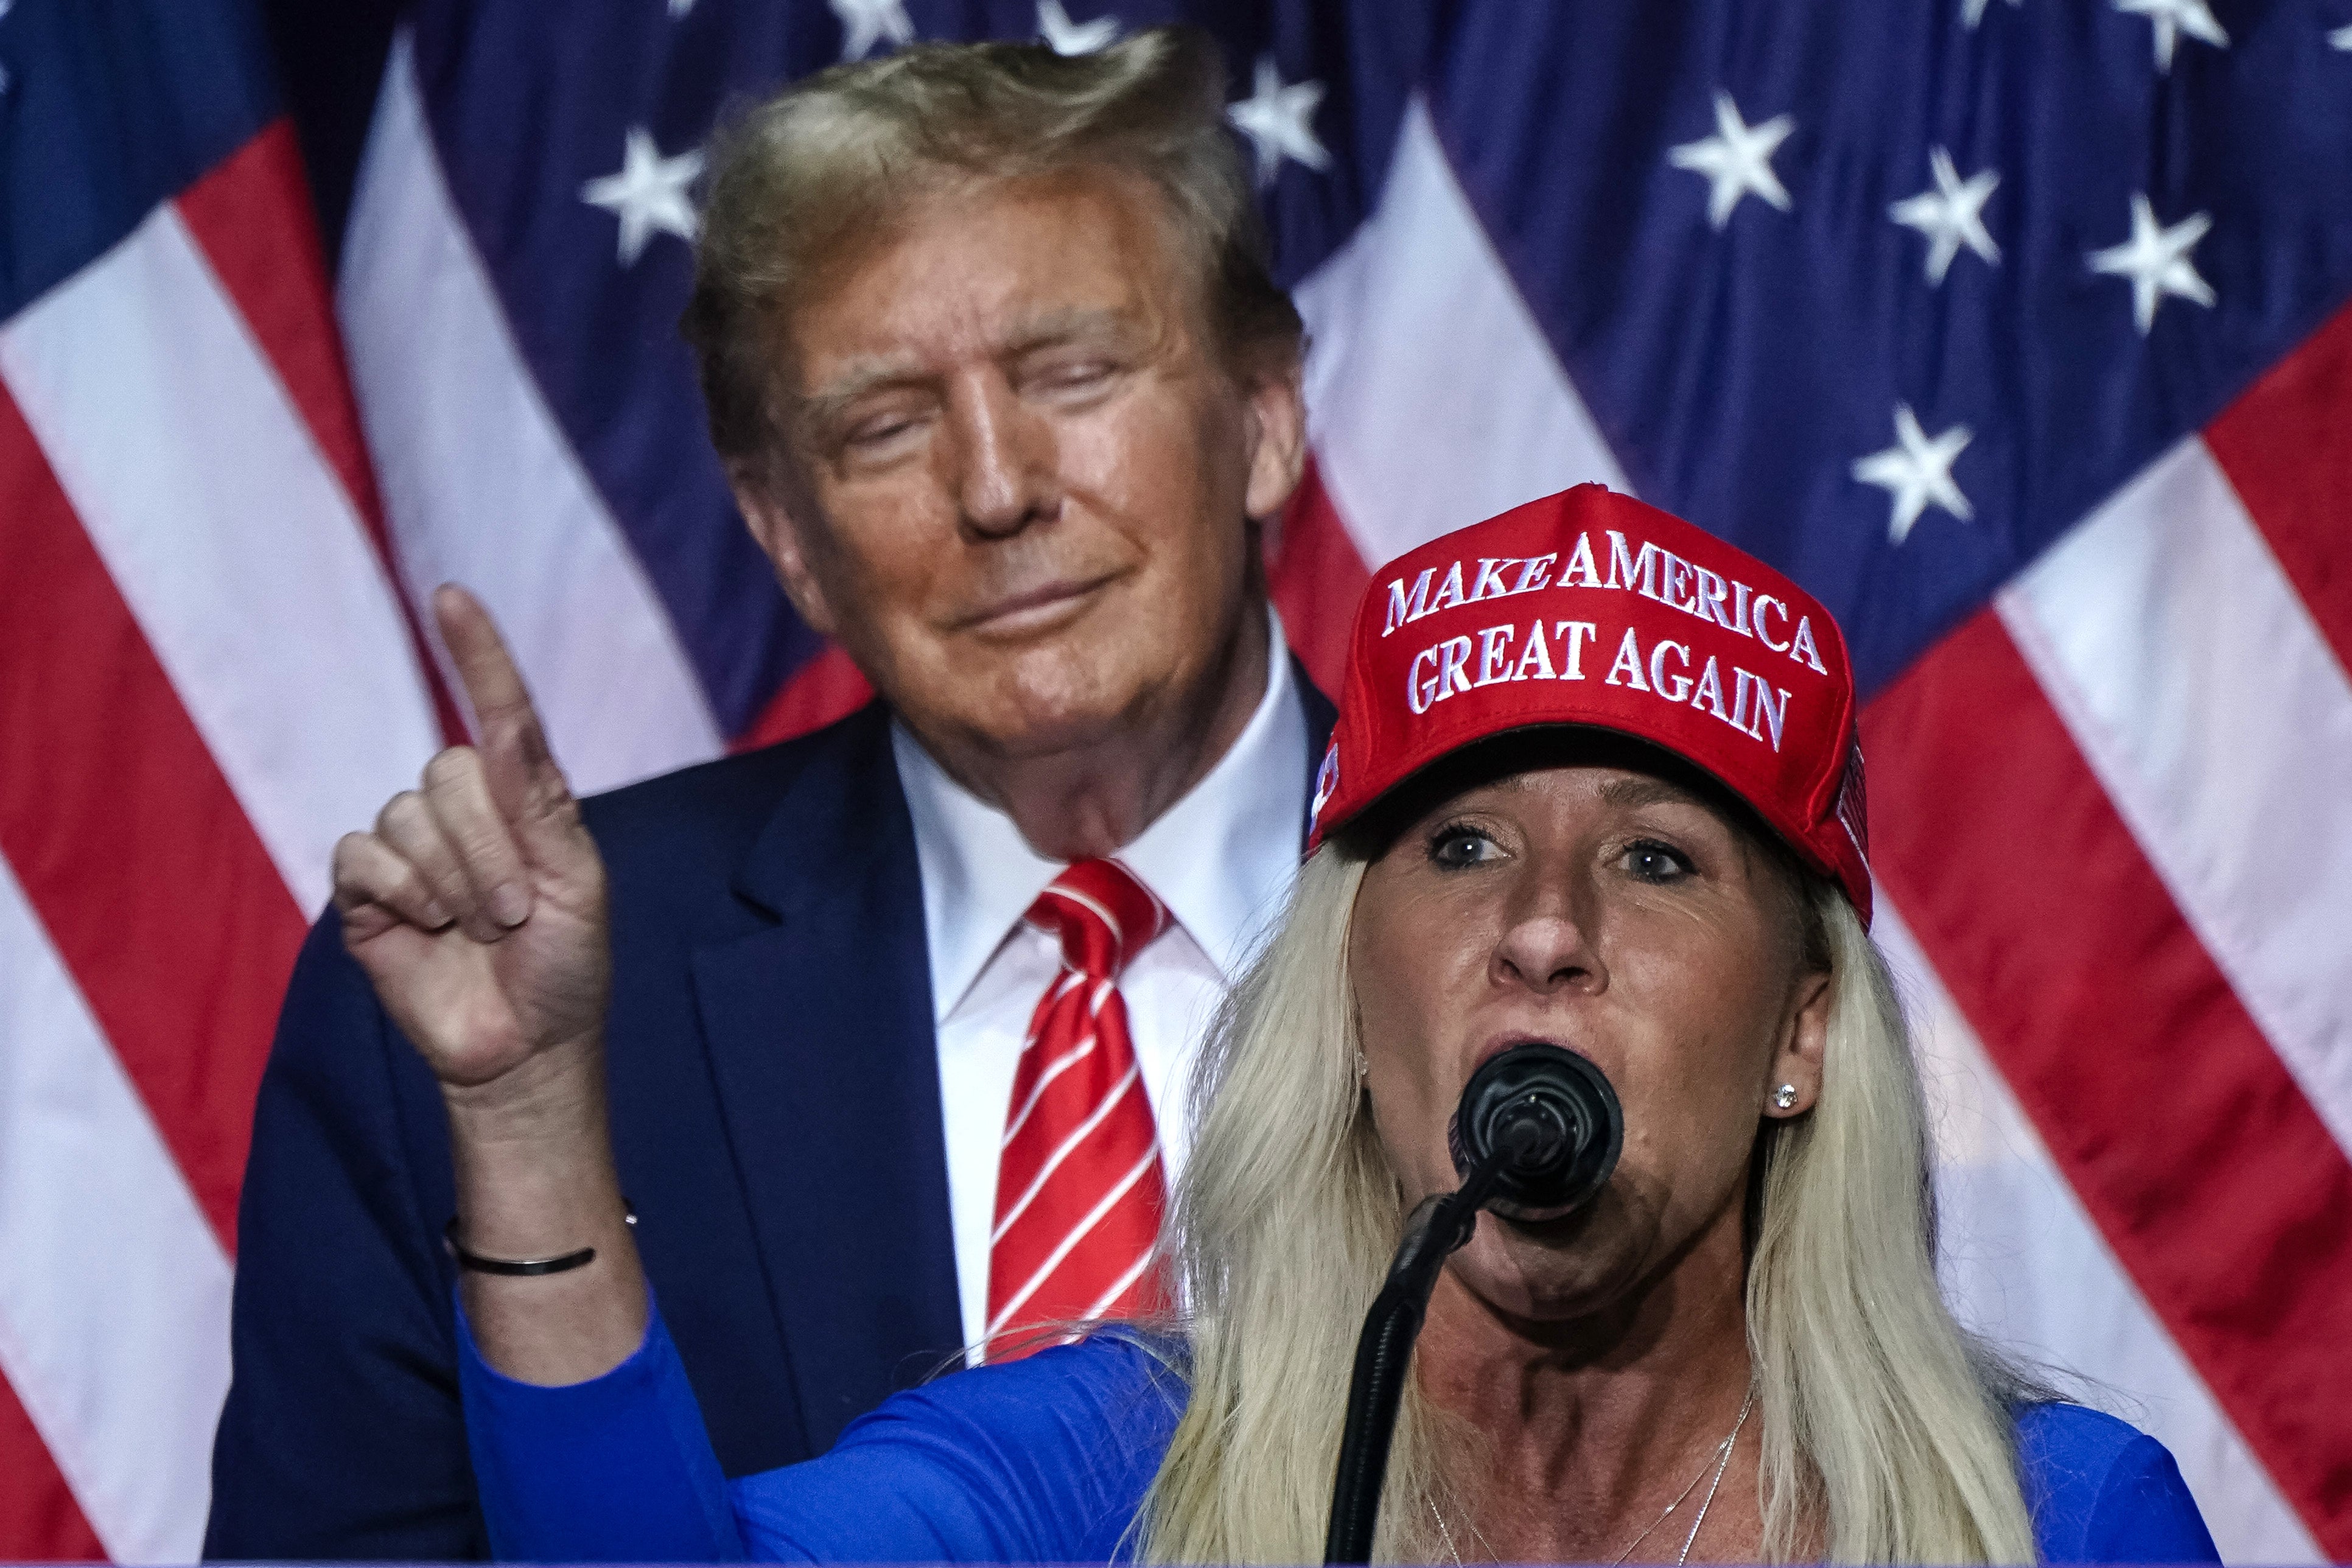 Marjorie Taylor Greene speaking alongside Donald Trump at a campaign event in Georgia on 9 March 2024